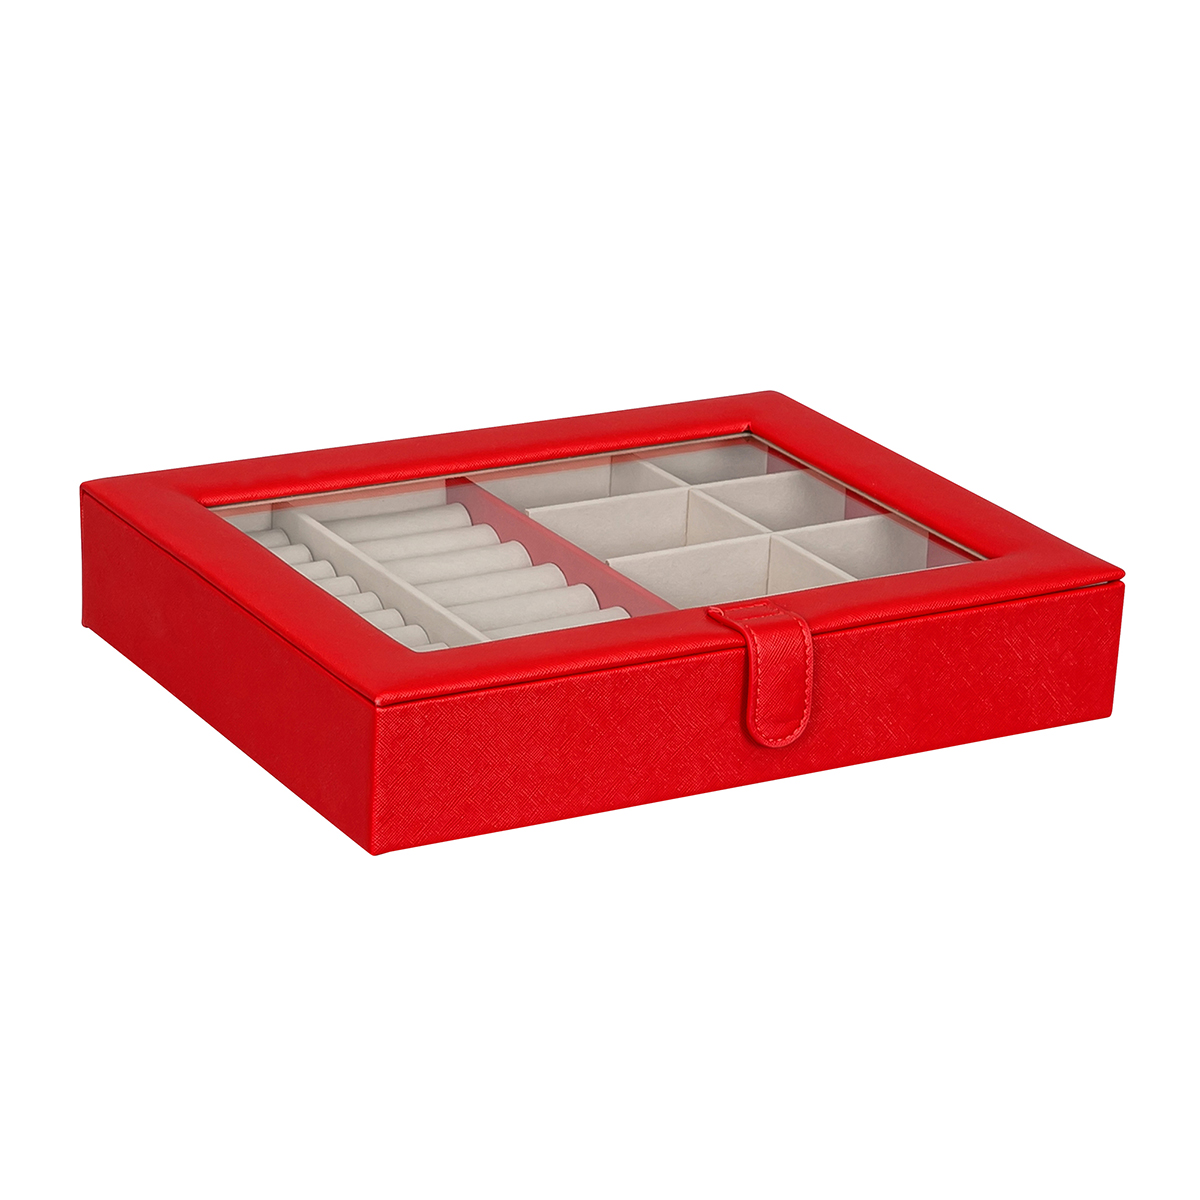 Mele & Co. Crystal Glass Textured Red Leather Jewelry Box